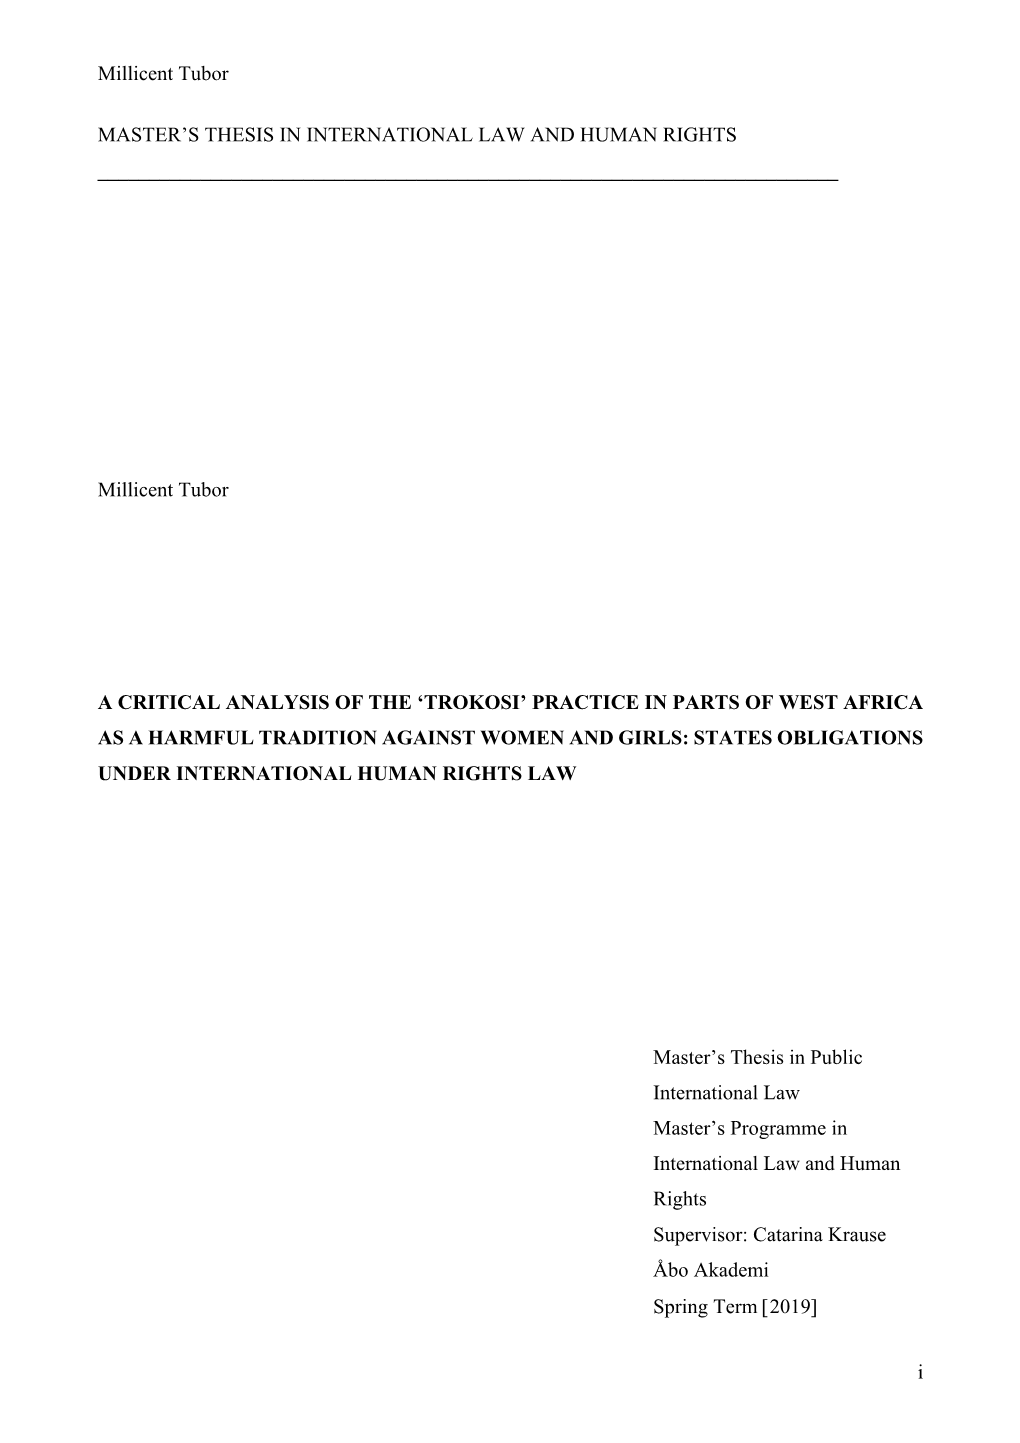 Millicent Tubor I MASTER's THESIS in INTERNATIONAL LAW